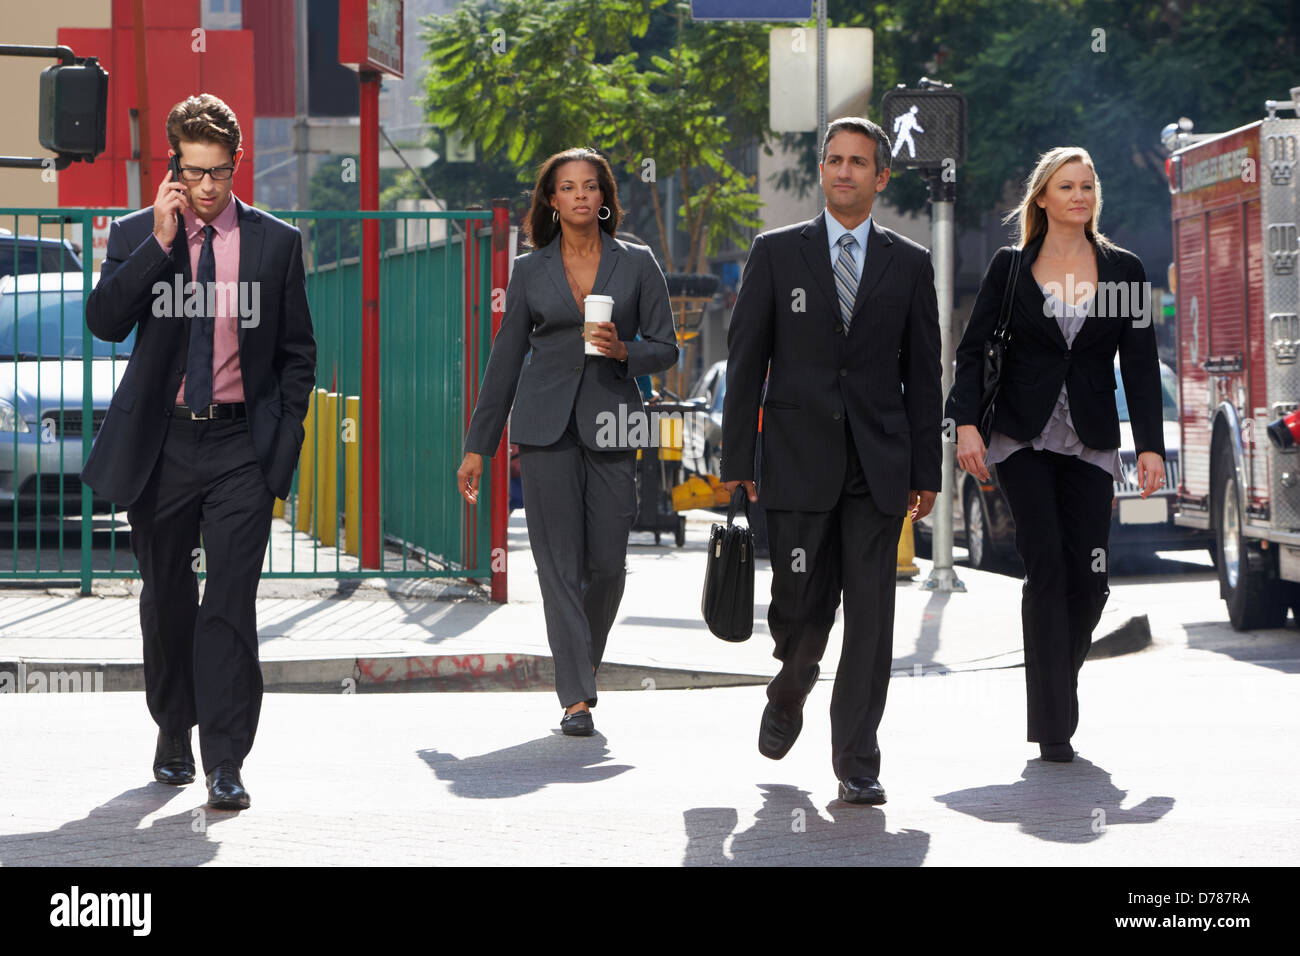 Group Of Businesspeople Crossing Street Stock Photo